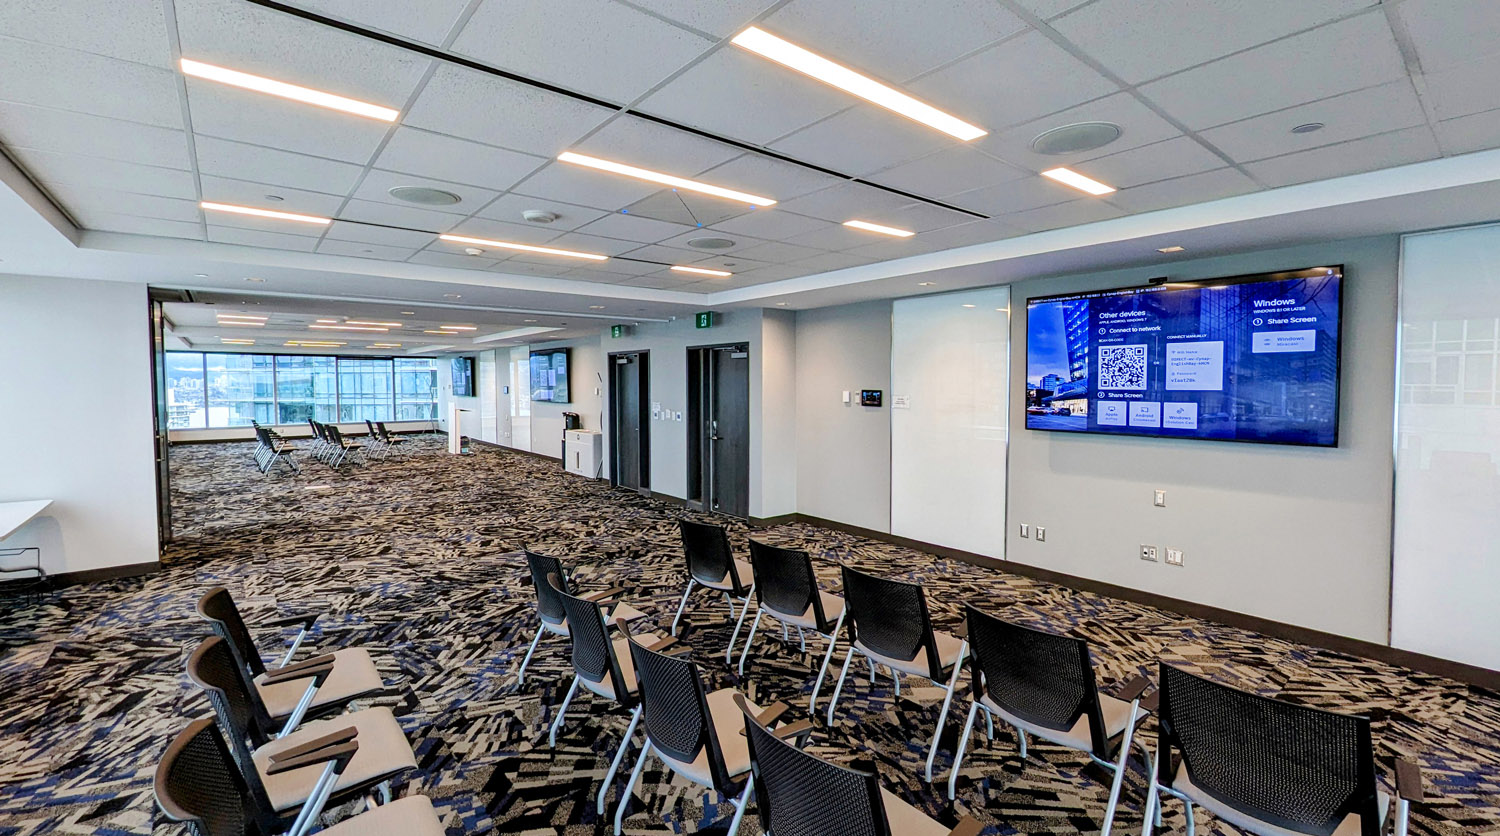 Thumbnail - When combined, the two rooms seat up to 80 people. TLP 1025M Touchlink Pro Touchpanels make it easy for tenants to control the system.